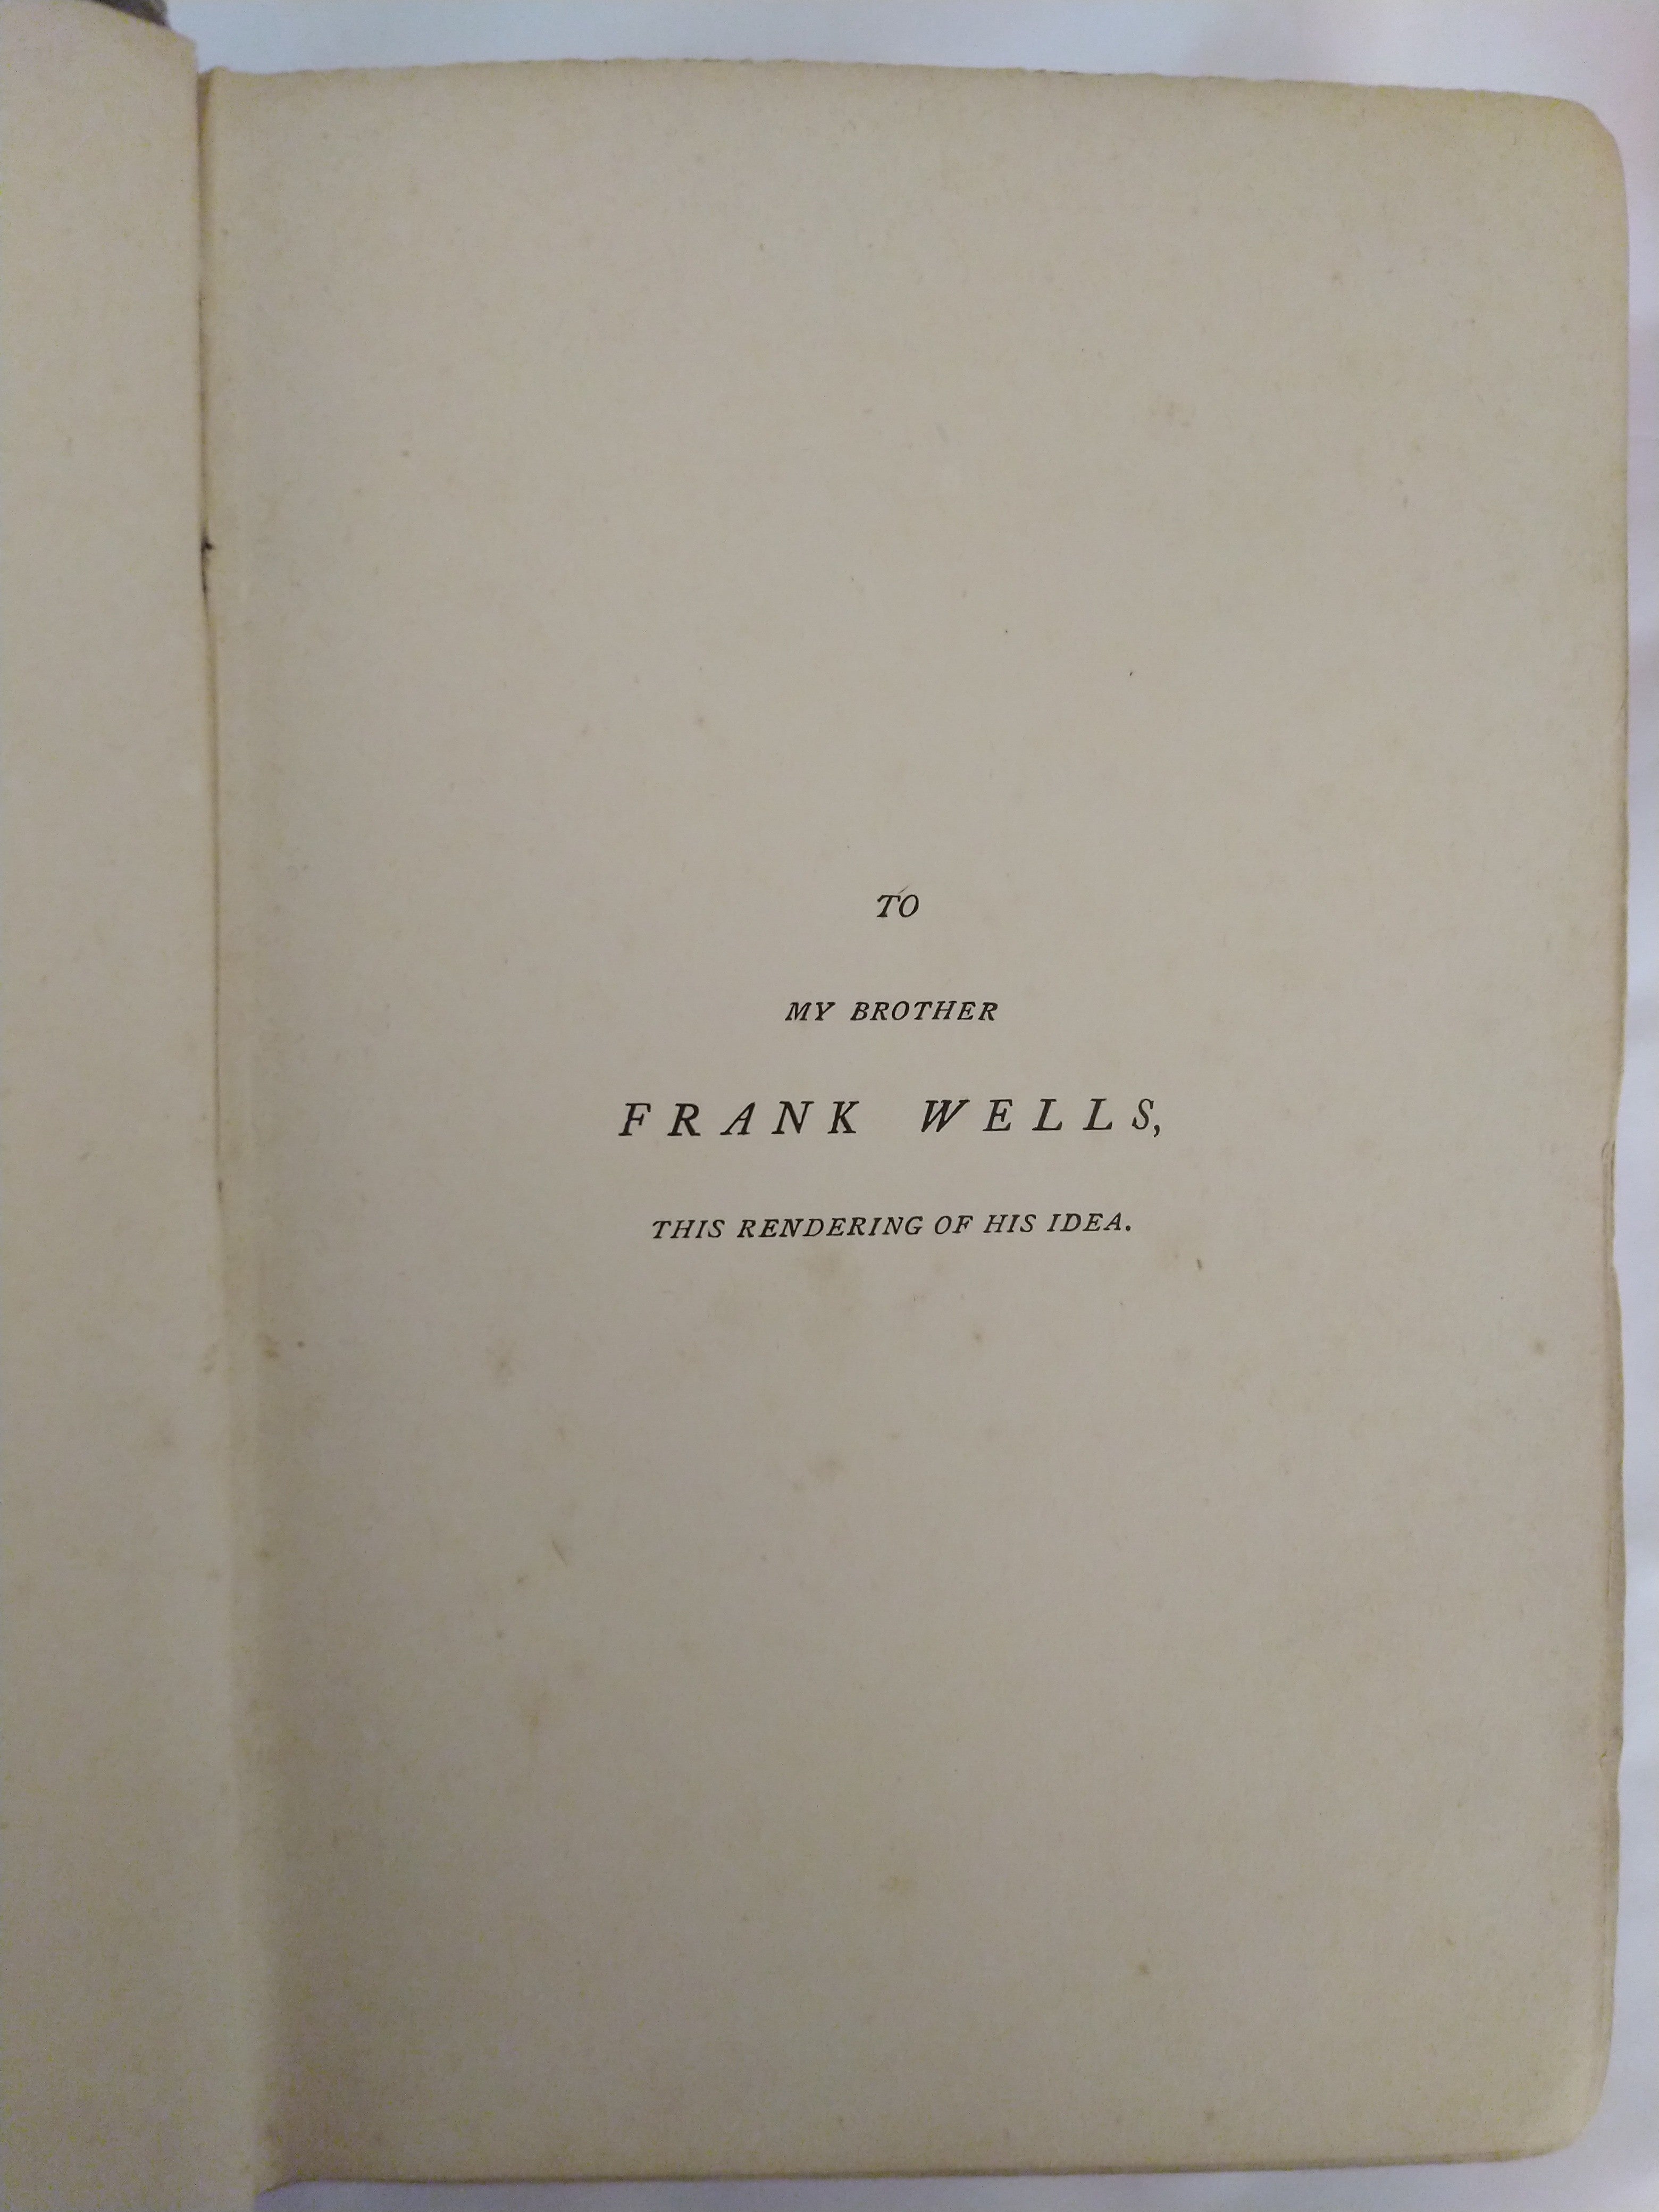 WAR OF THE WORLDS BY H. G. WELLS 1898 FIRST EDITION